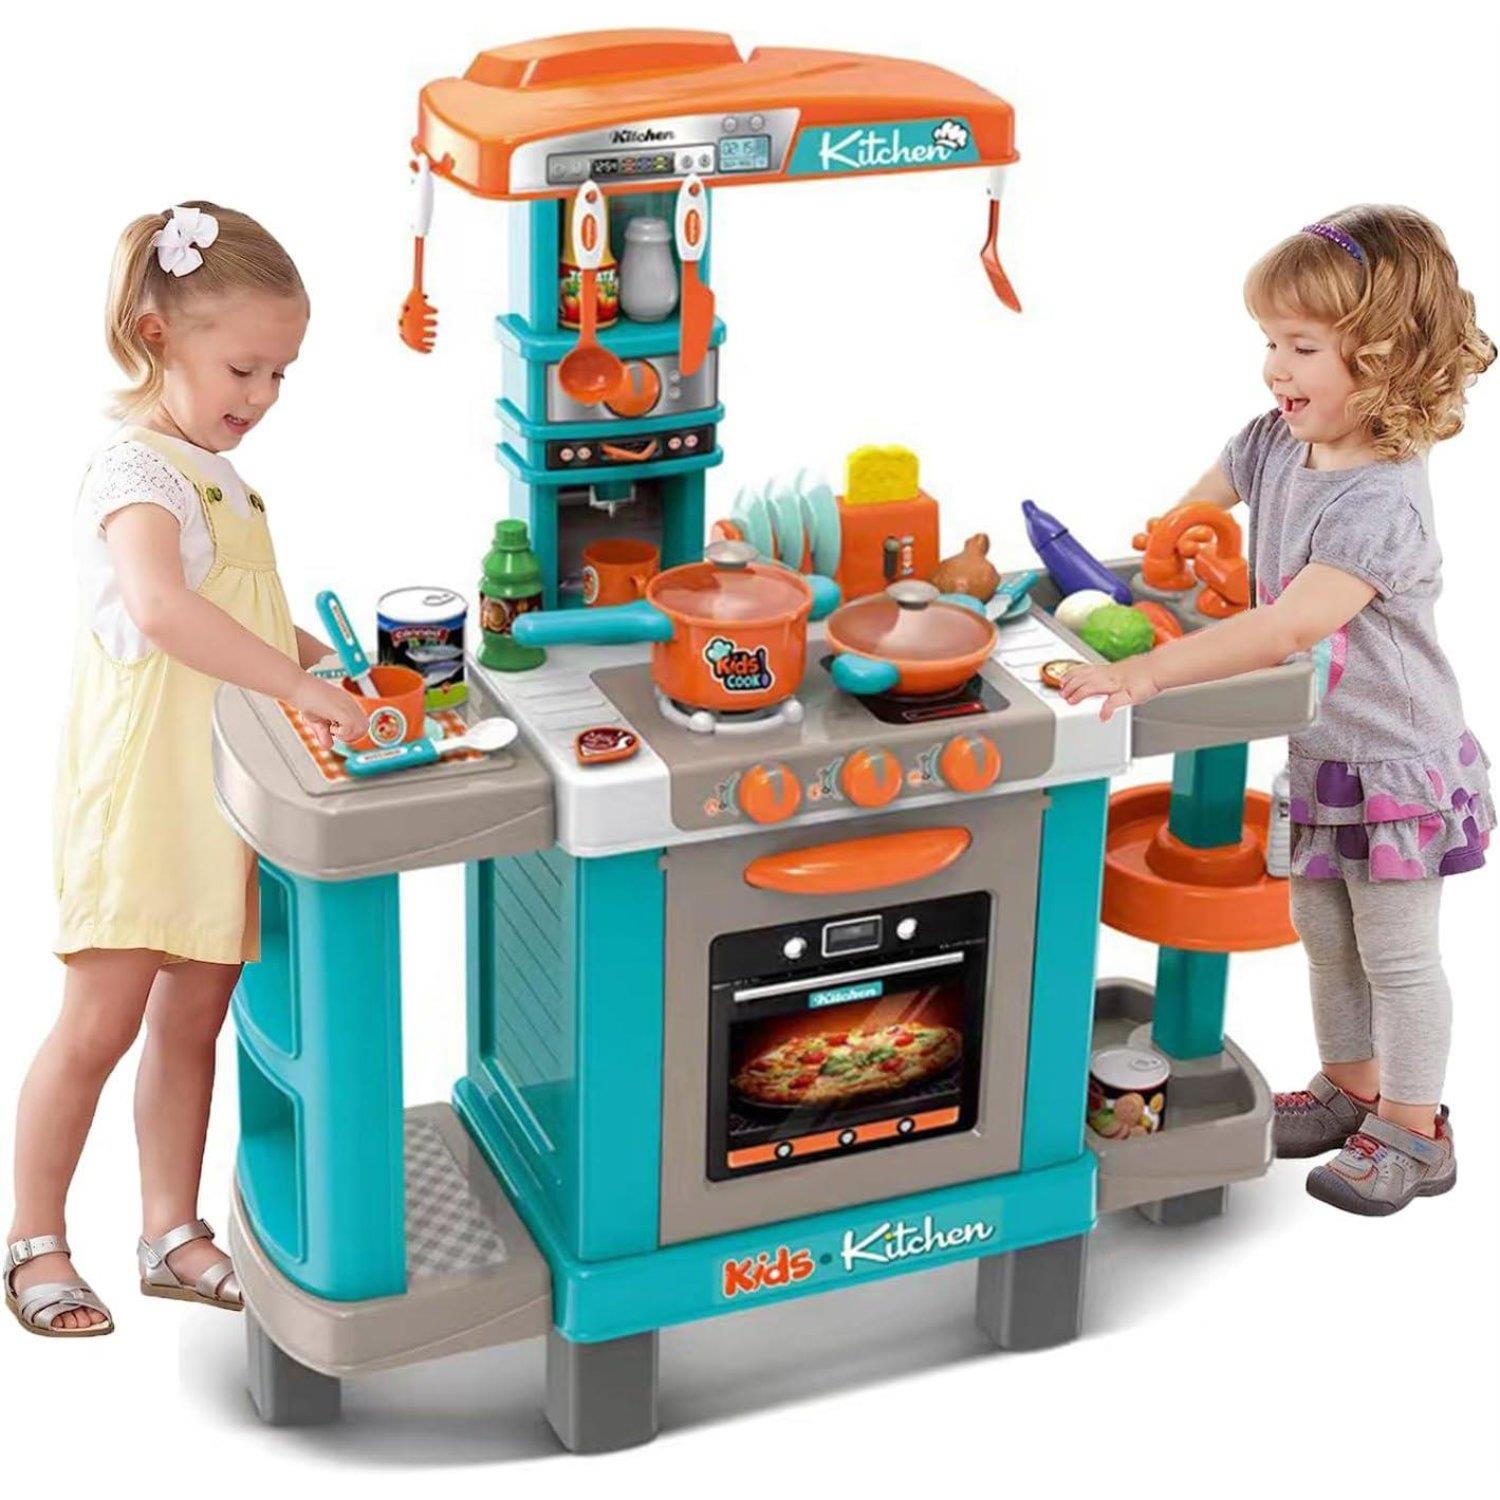 The Magic Toy Shop Toys and Games Kids Kitchen Play Set with Cookware Play Food and Accessories